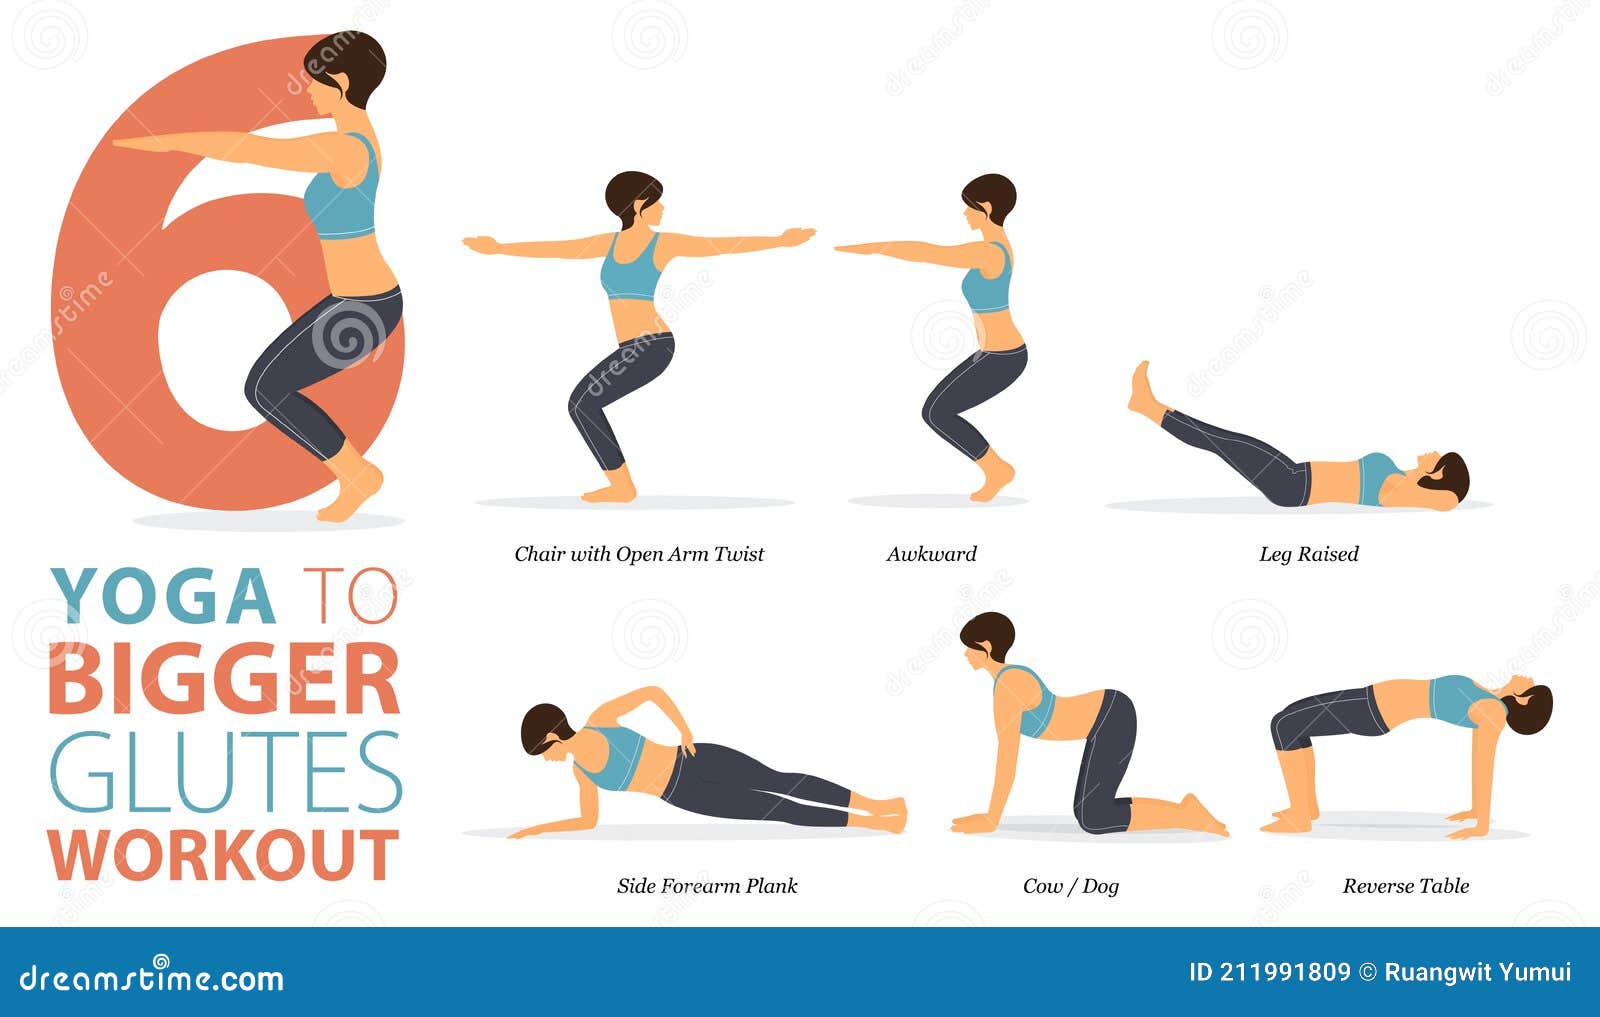 21 Simple Yoga Poses for Stress Relief | exercise-fitness - Sharecare